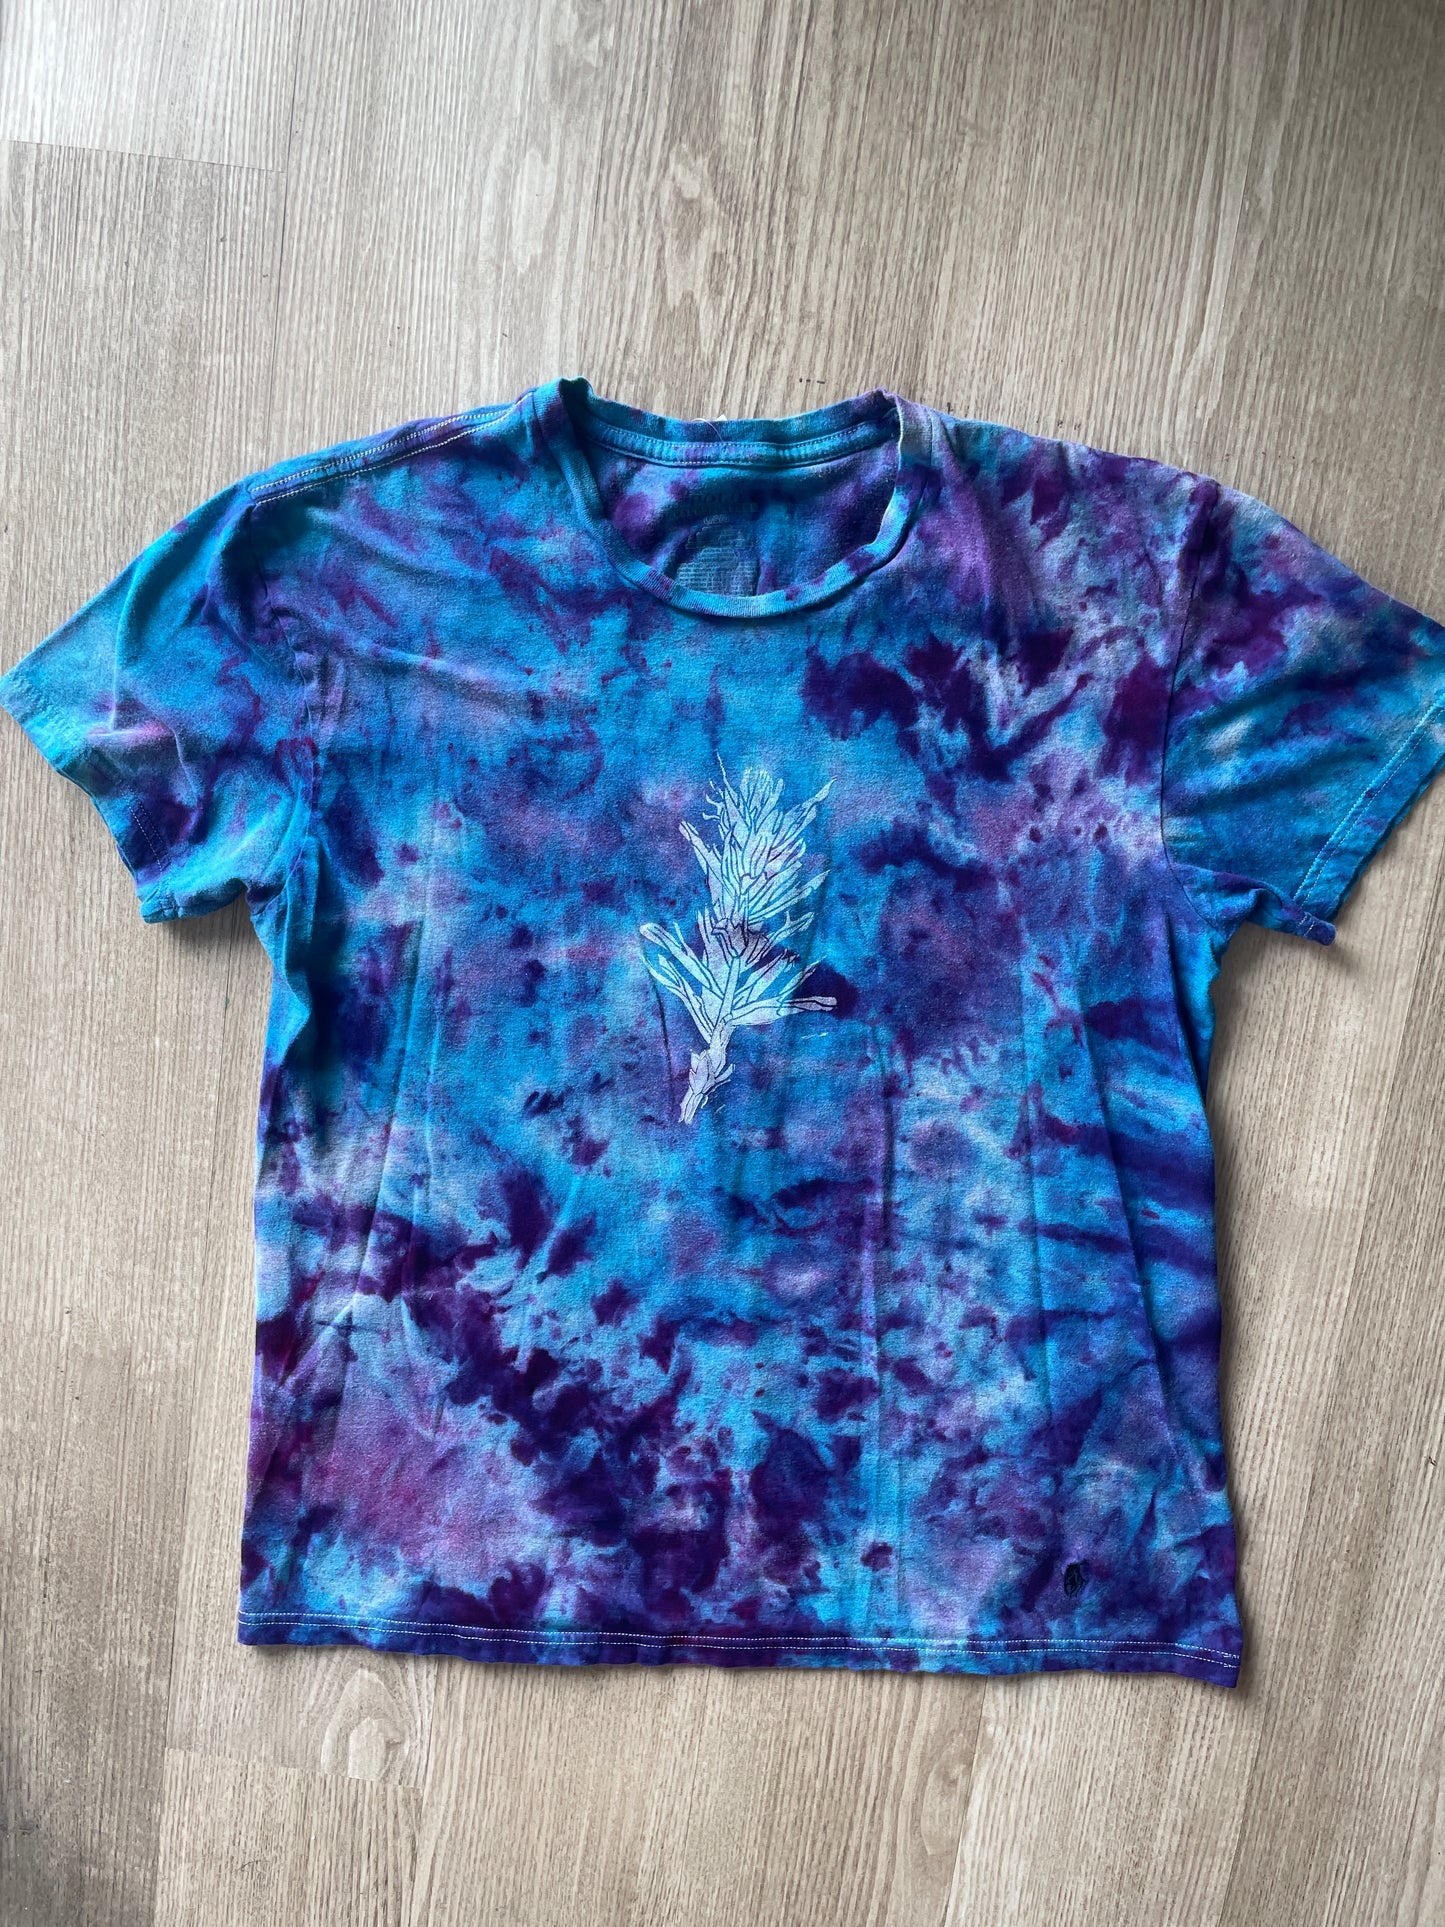 Large Men’s Indian Paintbrush Tie Dye T-Shirt | One-Of-a-Kind Blue, Purple, and Pink Crumpled Short Sleeve